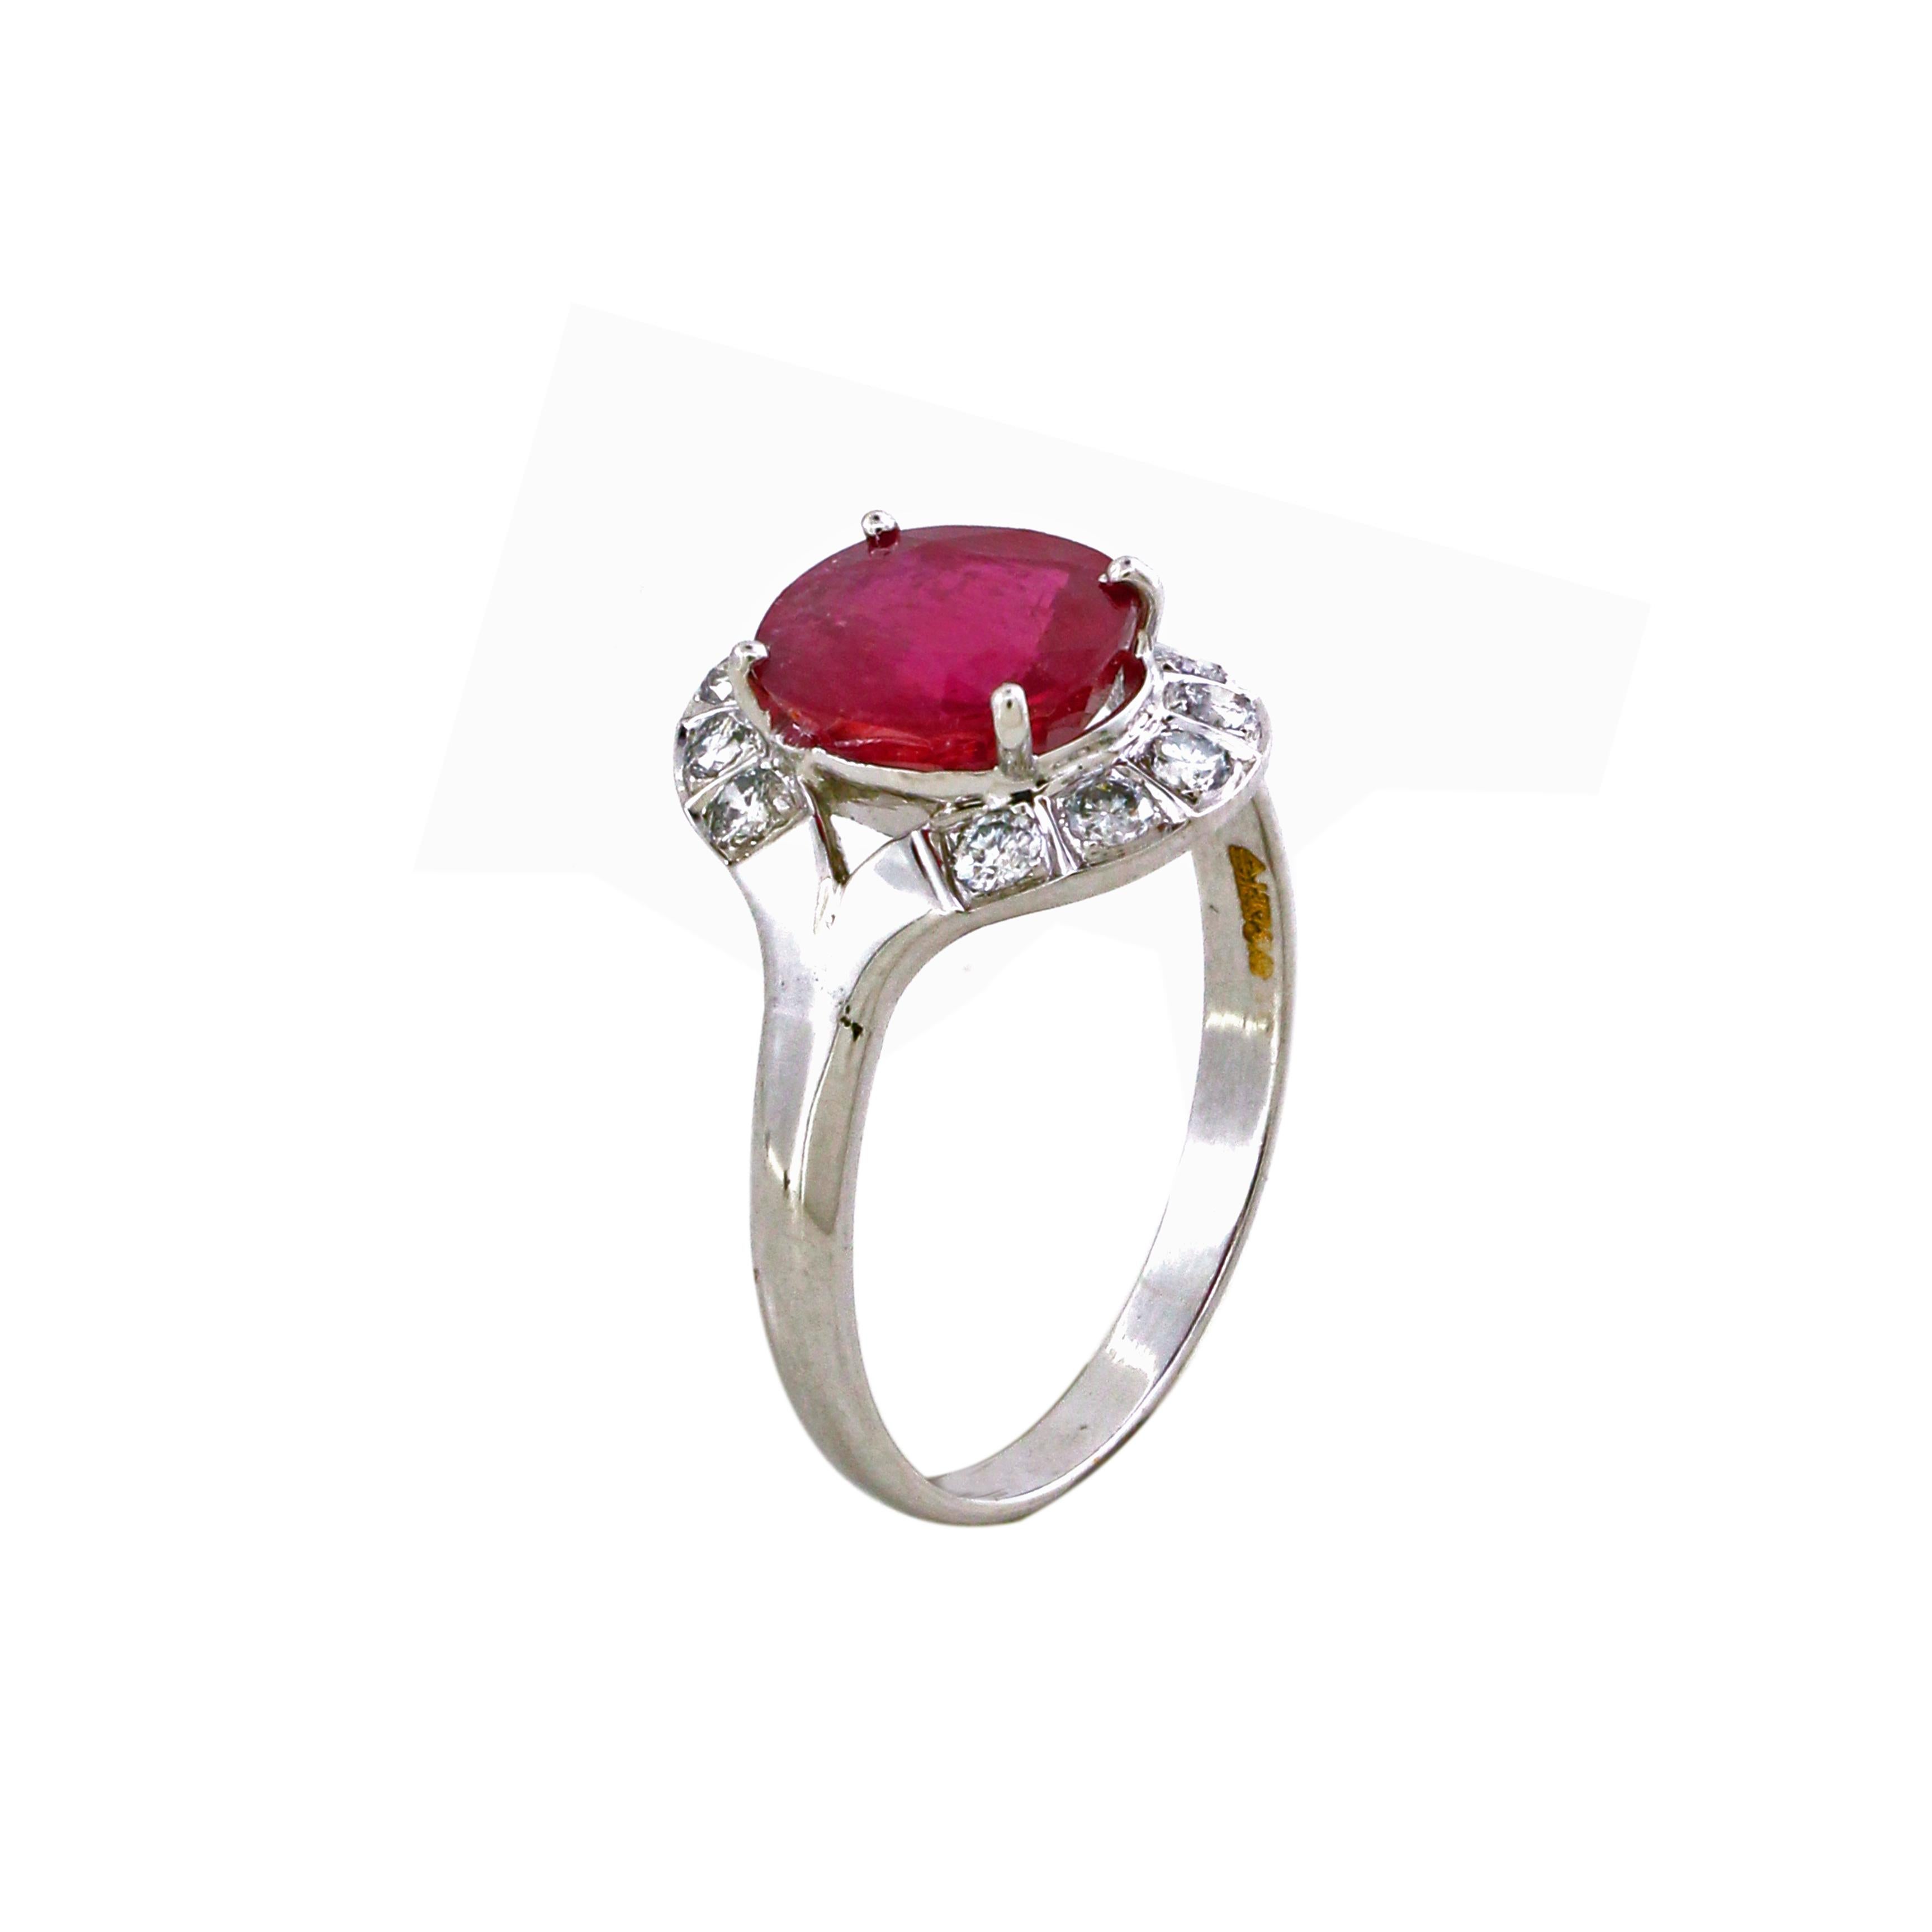 Behold the allure of our Oval Ruby Halo Diamond Ring, a mesmerizing masterpiece in sophistication and grace. At its heart, a stunning 3.48-carat oval-shaped ruby commands attention with its rich, deep red hue—an embodiment of passion and timeless